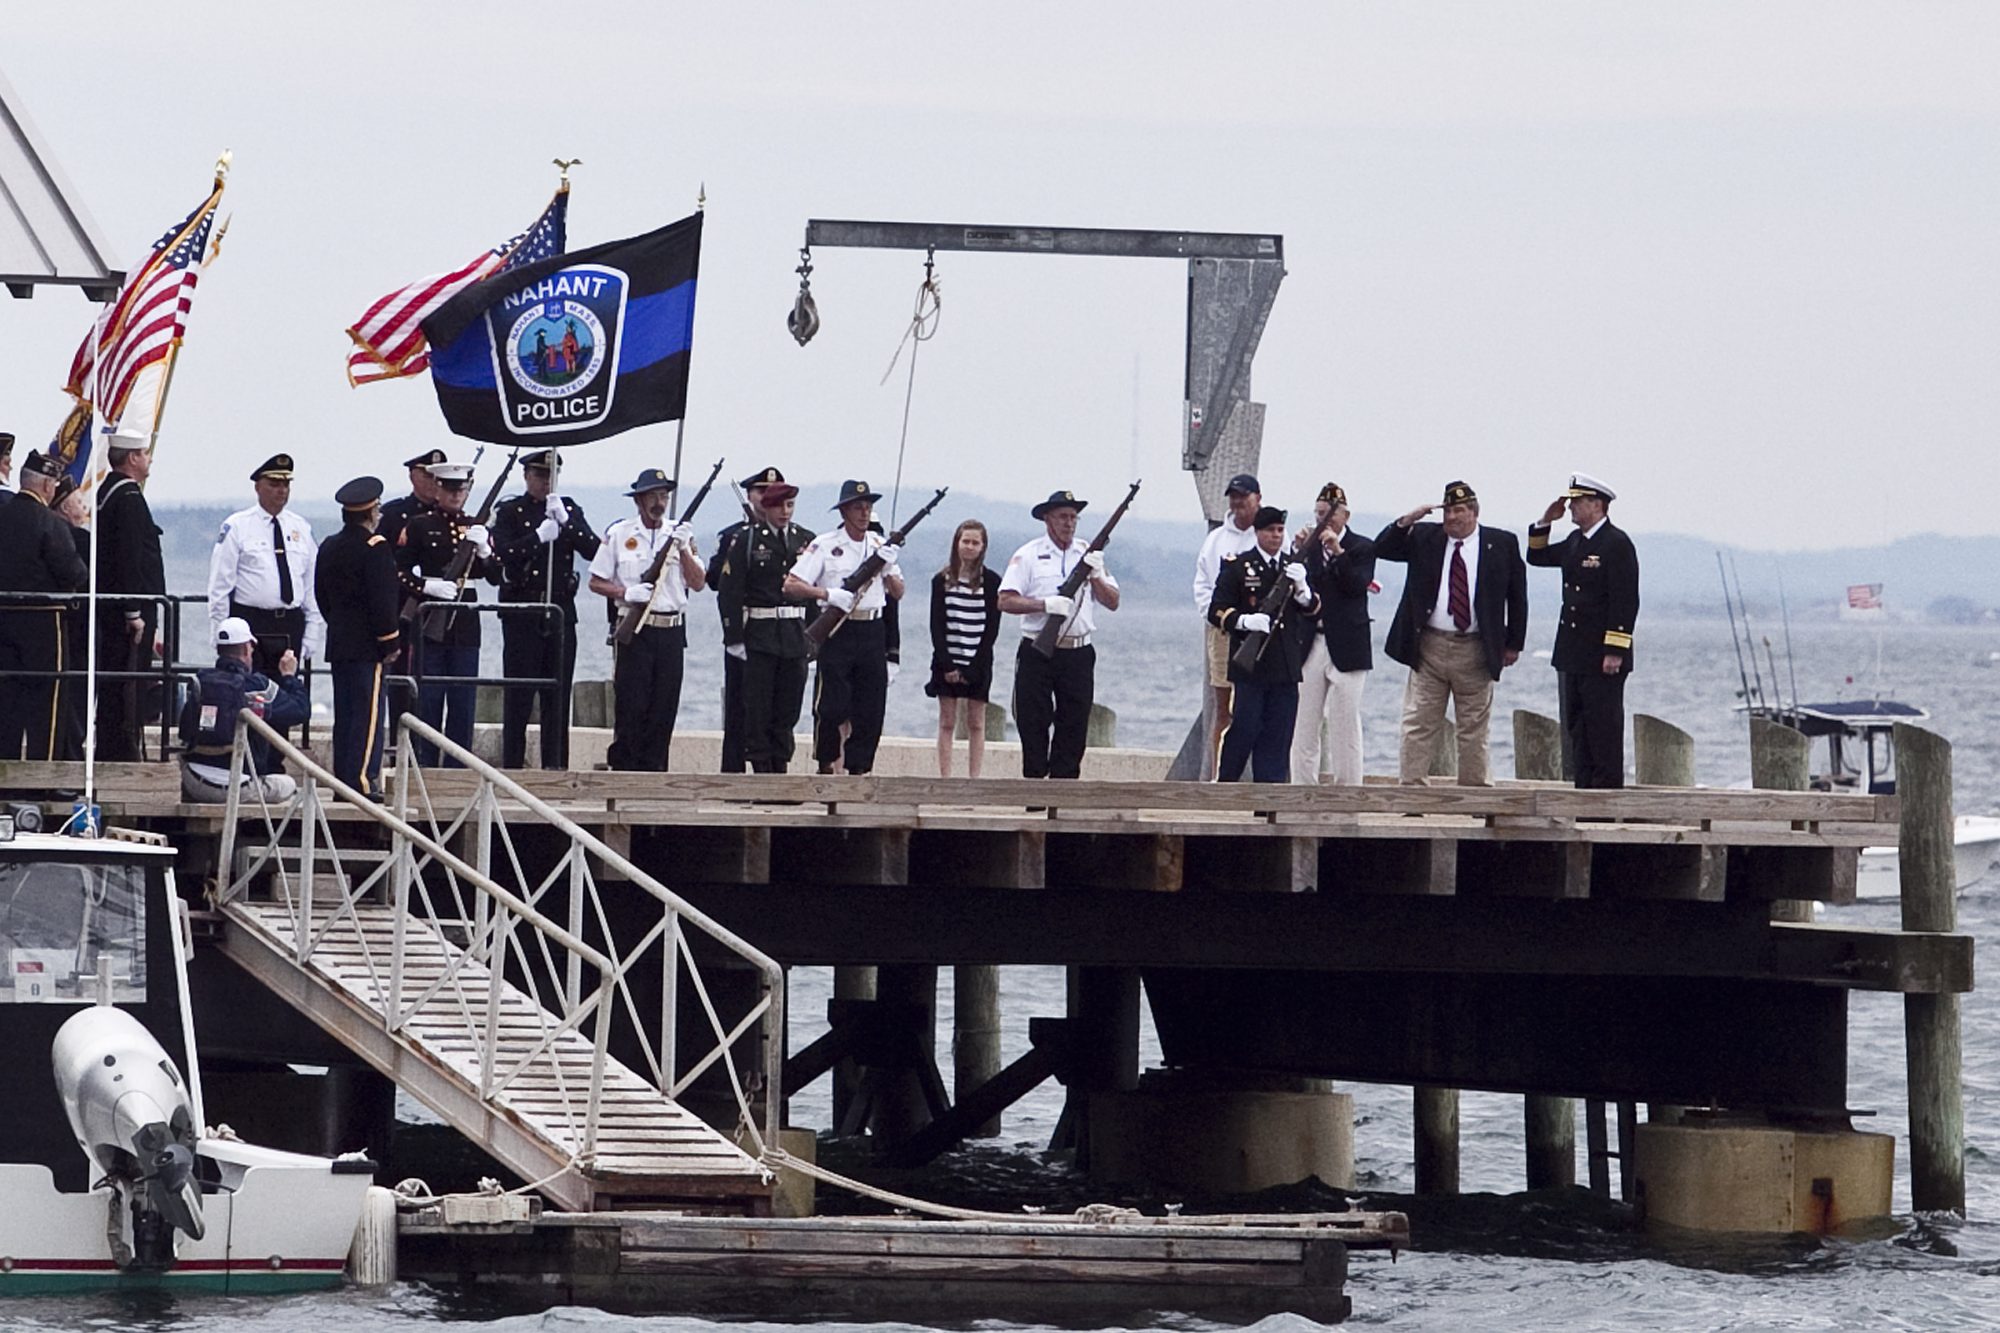 Nahant gears up for Memorial Day